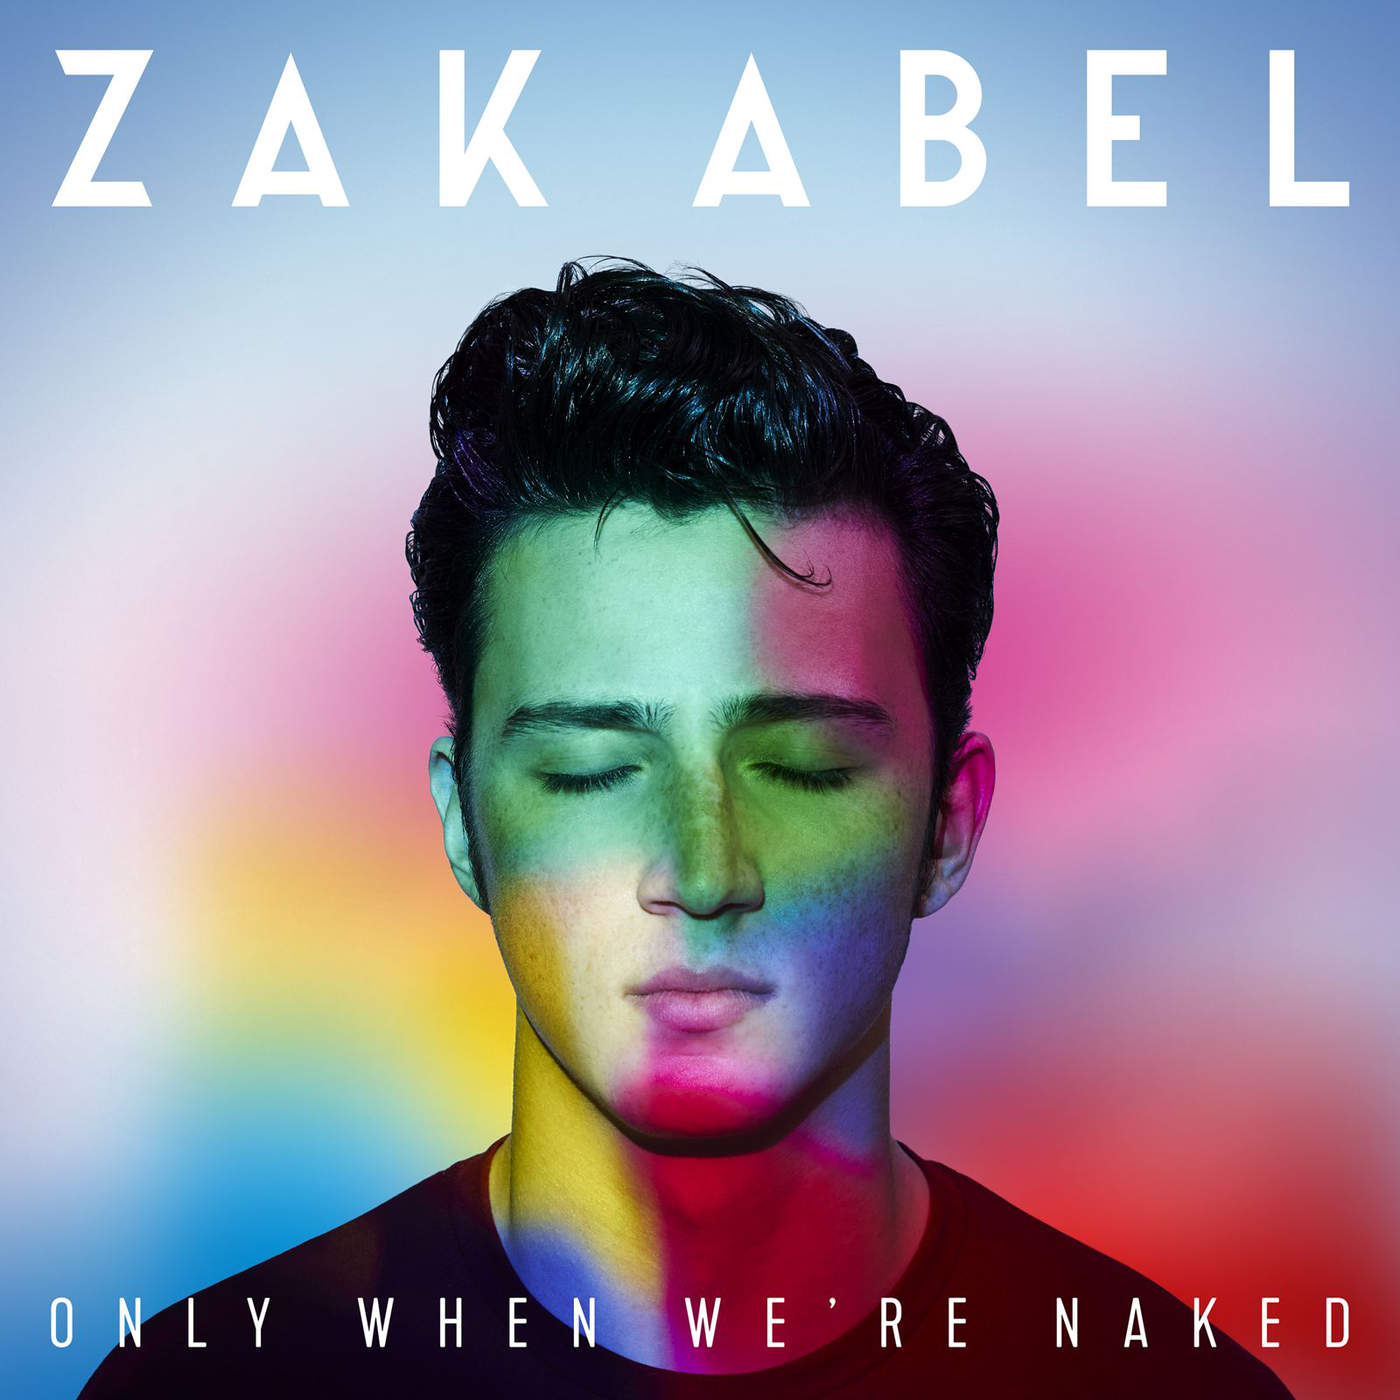 Zak Abel - Only When Were Naked [iTunes Plus AAC M4A 